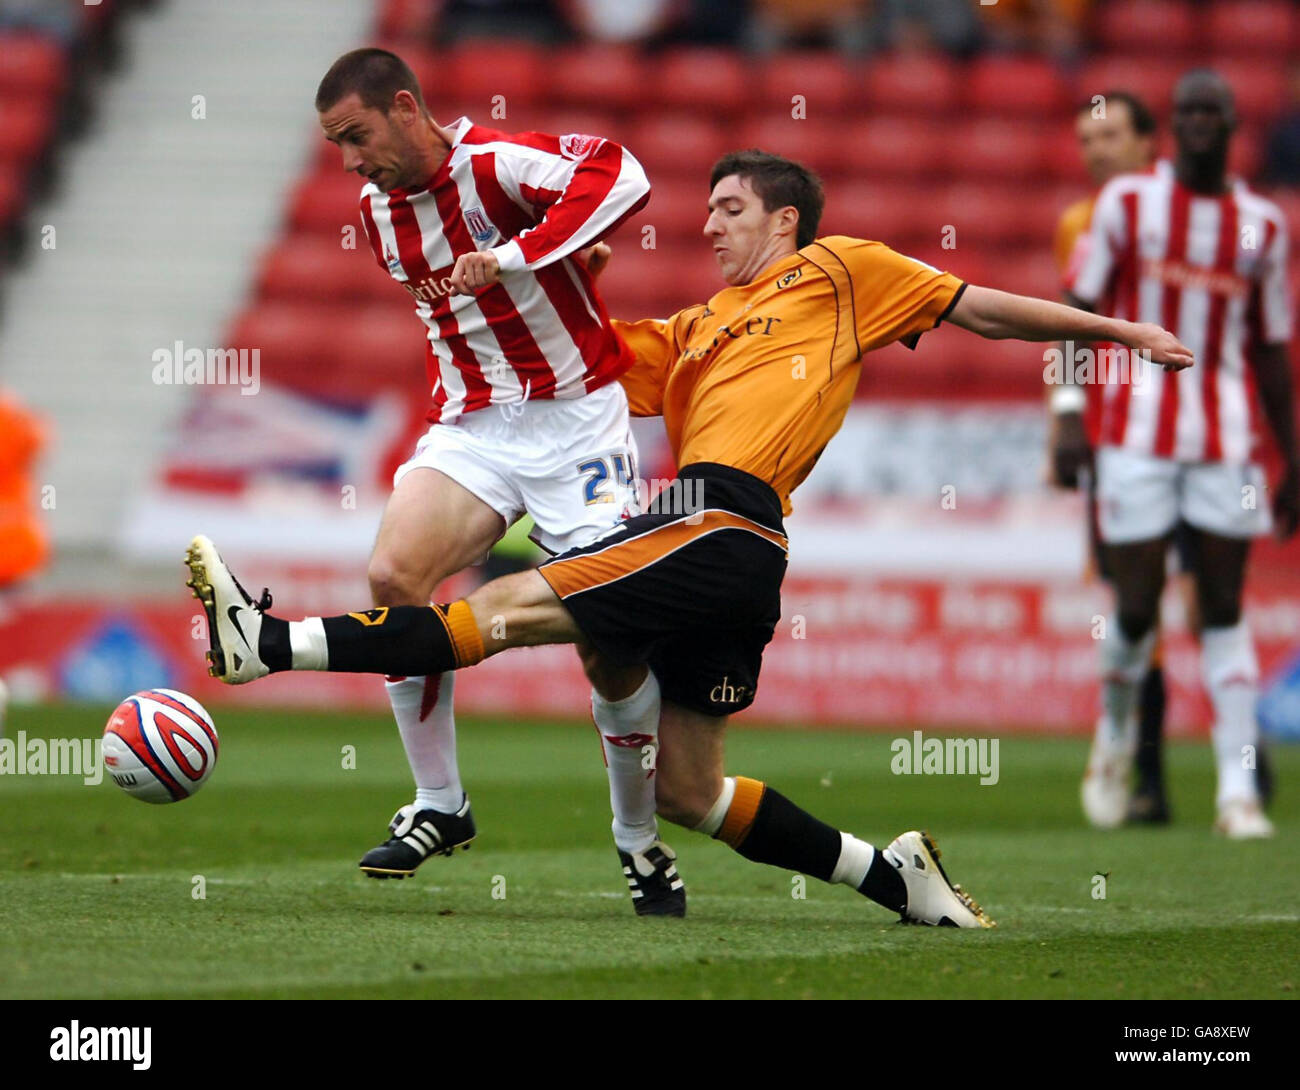 Stoke City's Rory Delap and Wolverhampton Wanderers' Stephen Ward in action during the Coca-Cola Championship match at the Britannia Stadium, Stoke. Stock Photo